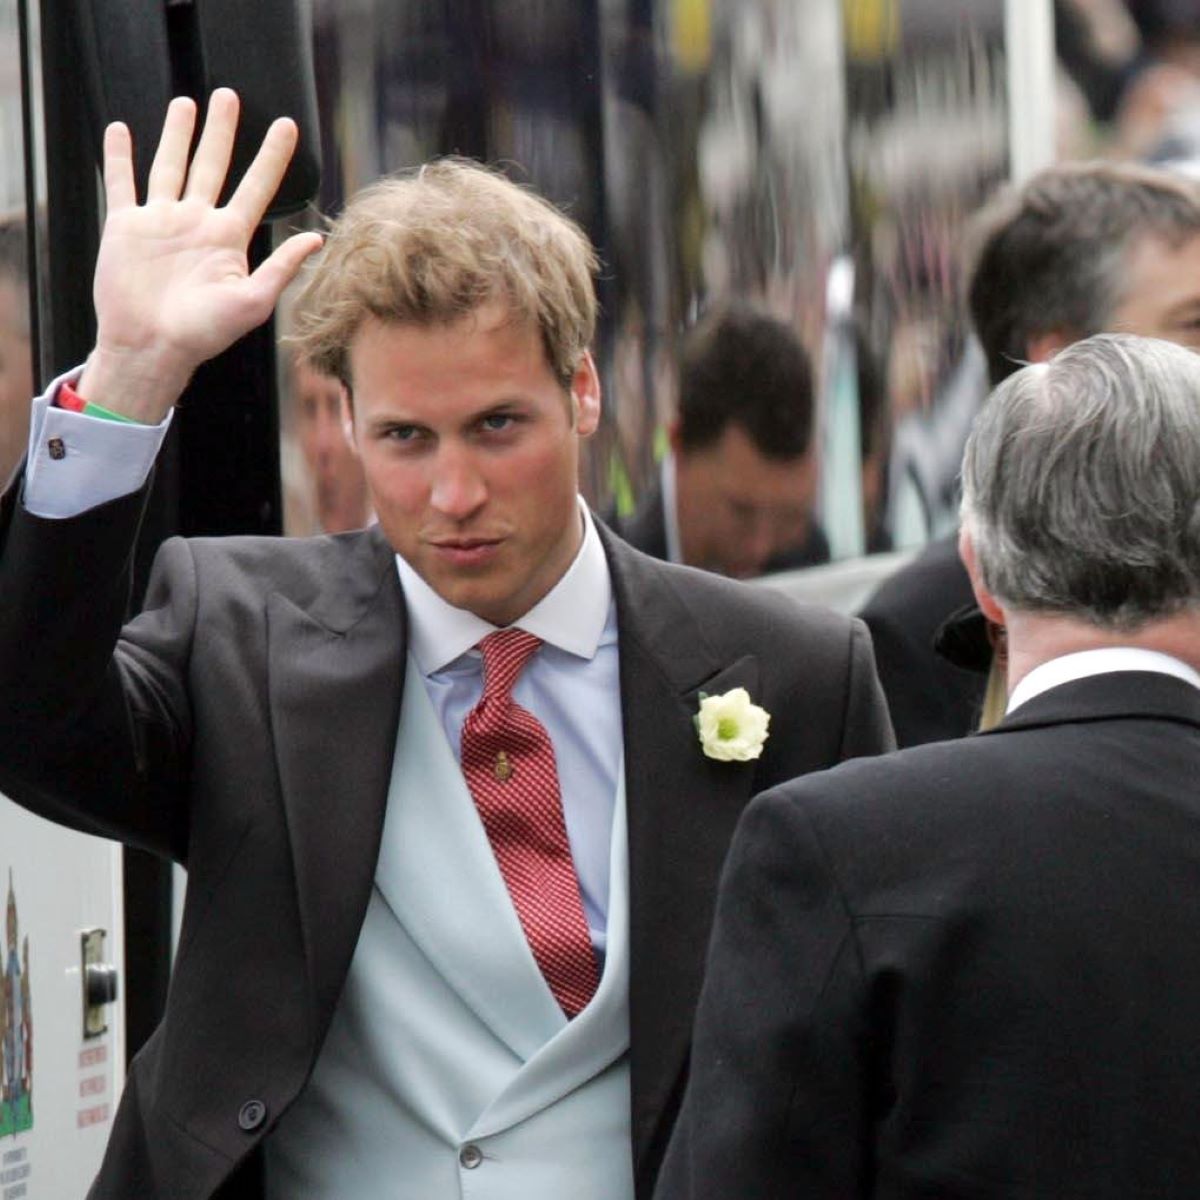 Prince William waves to onlookers as he arrives to the wedding of his father, then-Prince Charles and Camilla Parker Bowles